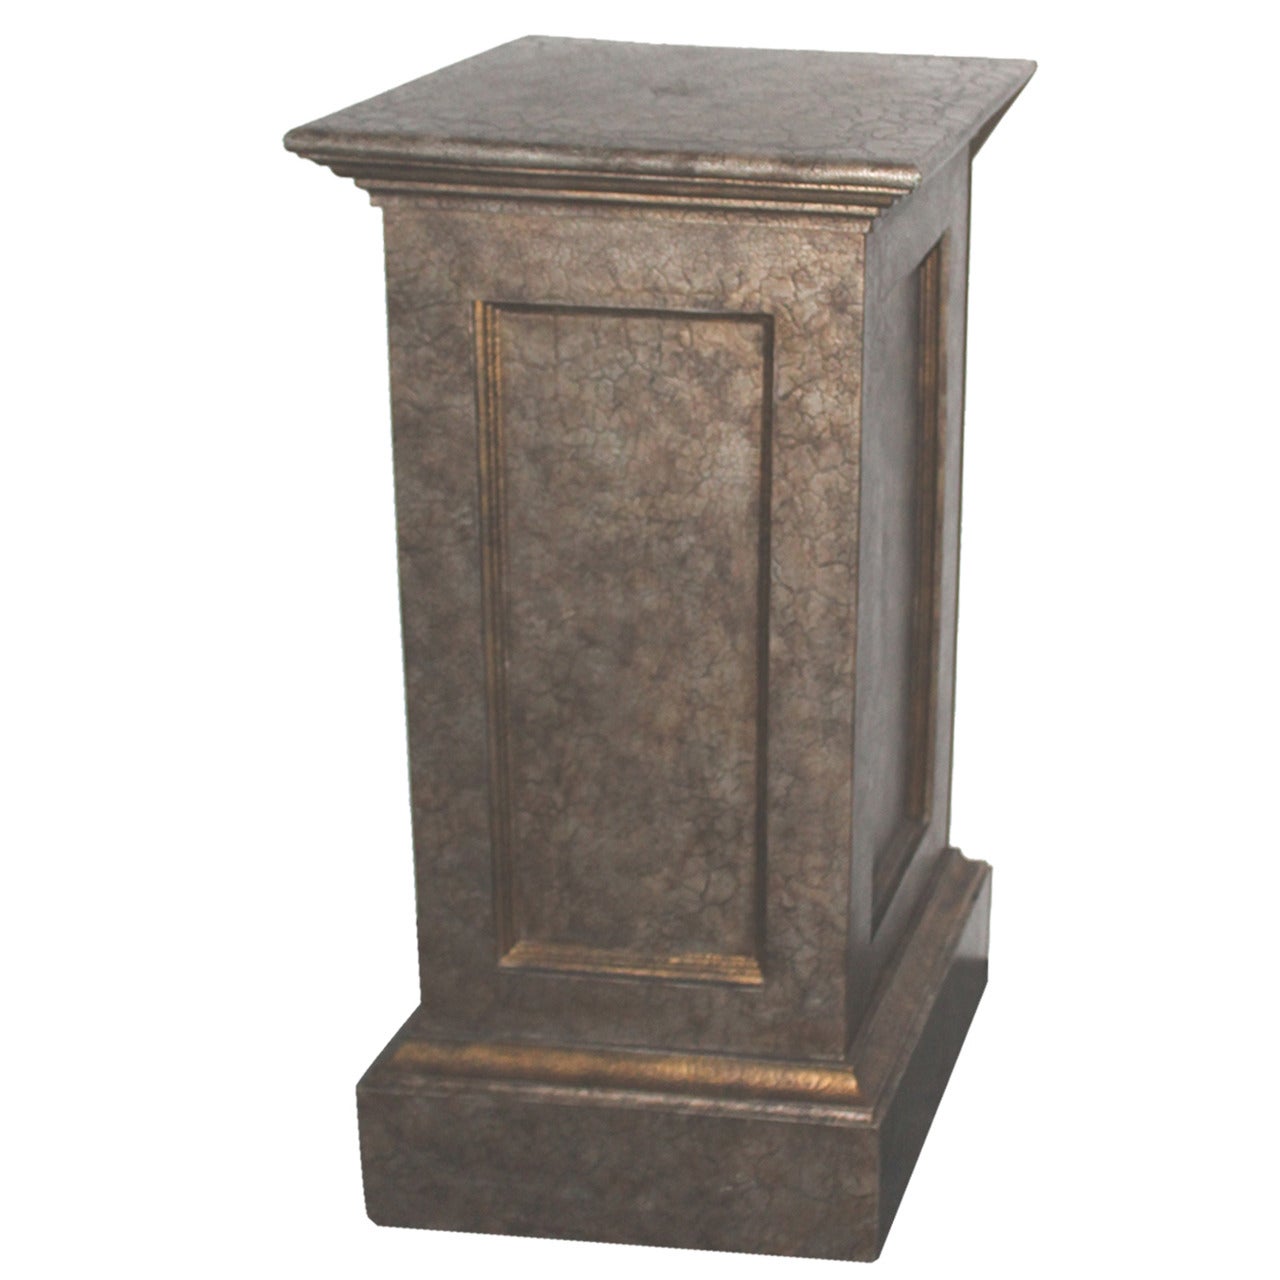 19th Century Pedestal in Original Painted Surface